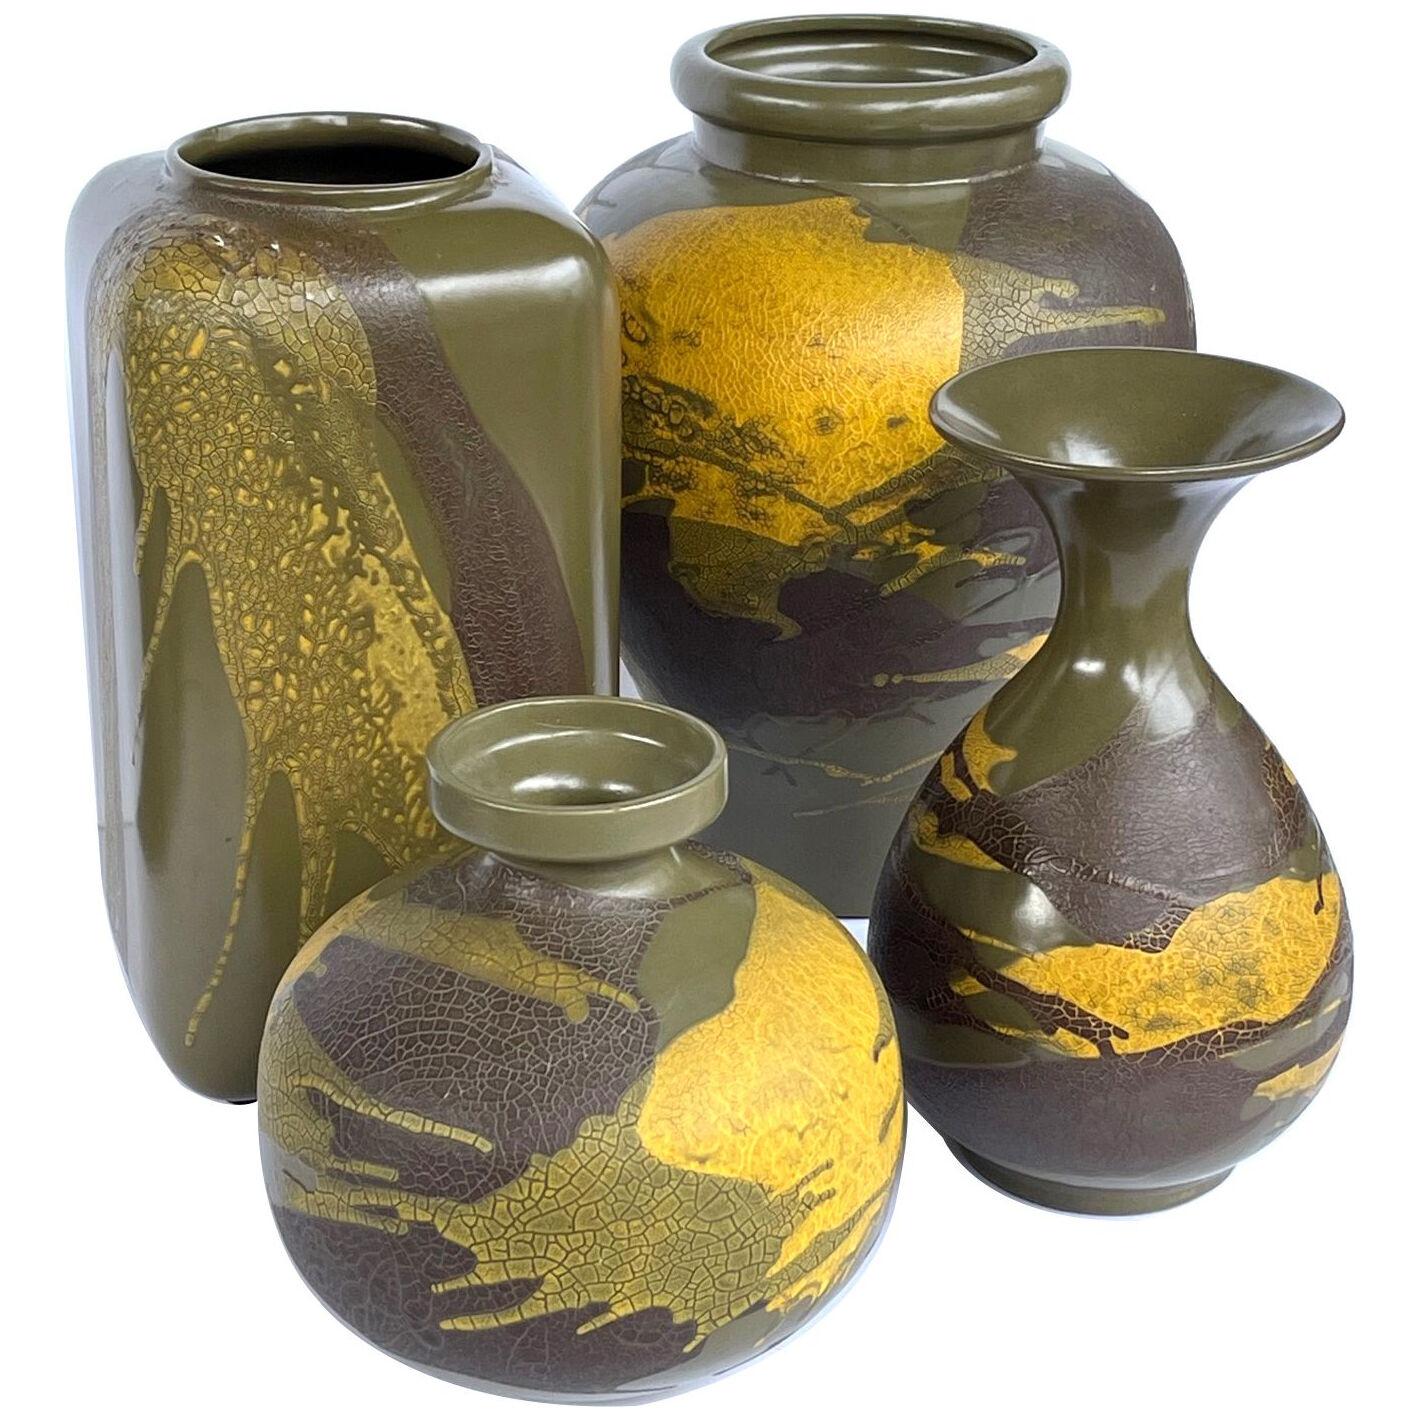 4 Royal Haeger Pottery Vessels w Yellow & Brown Drip Glaze on Olive Green Ground